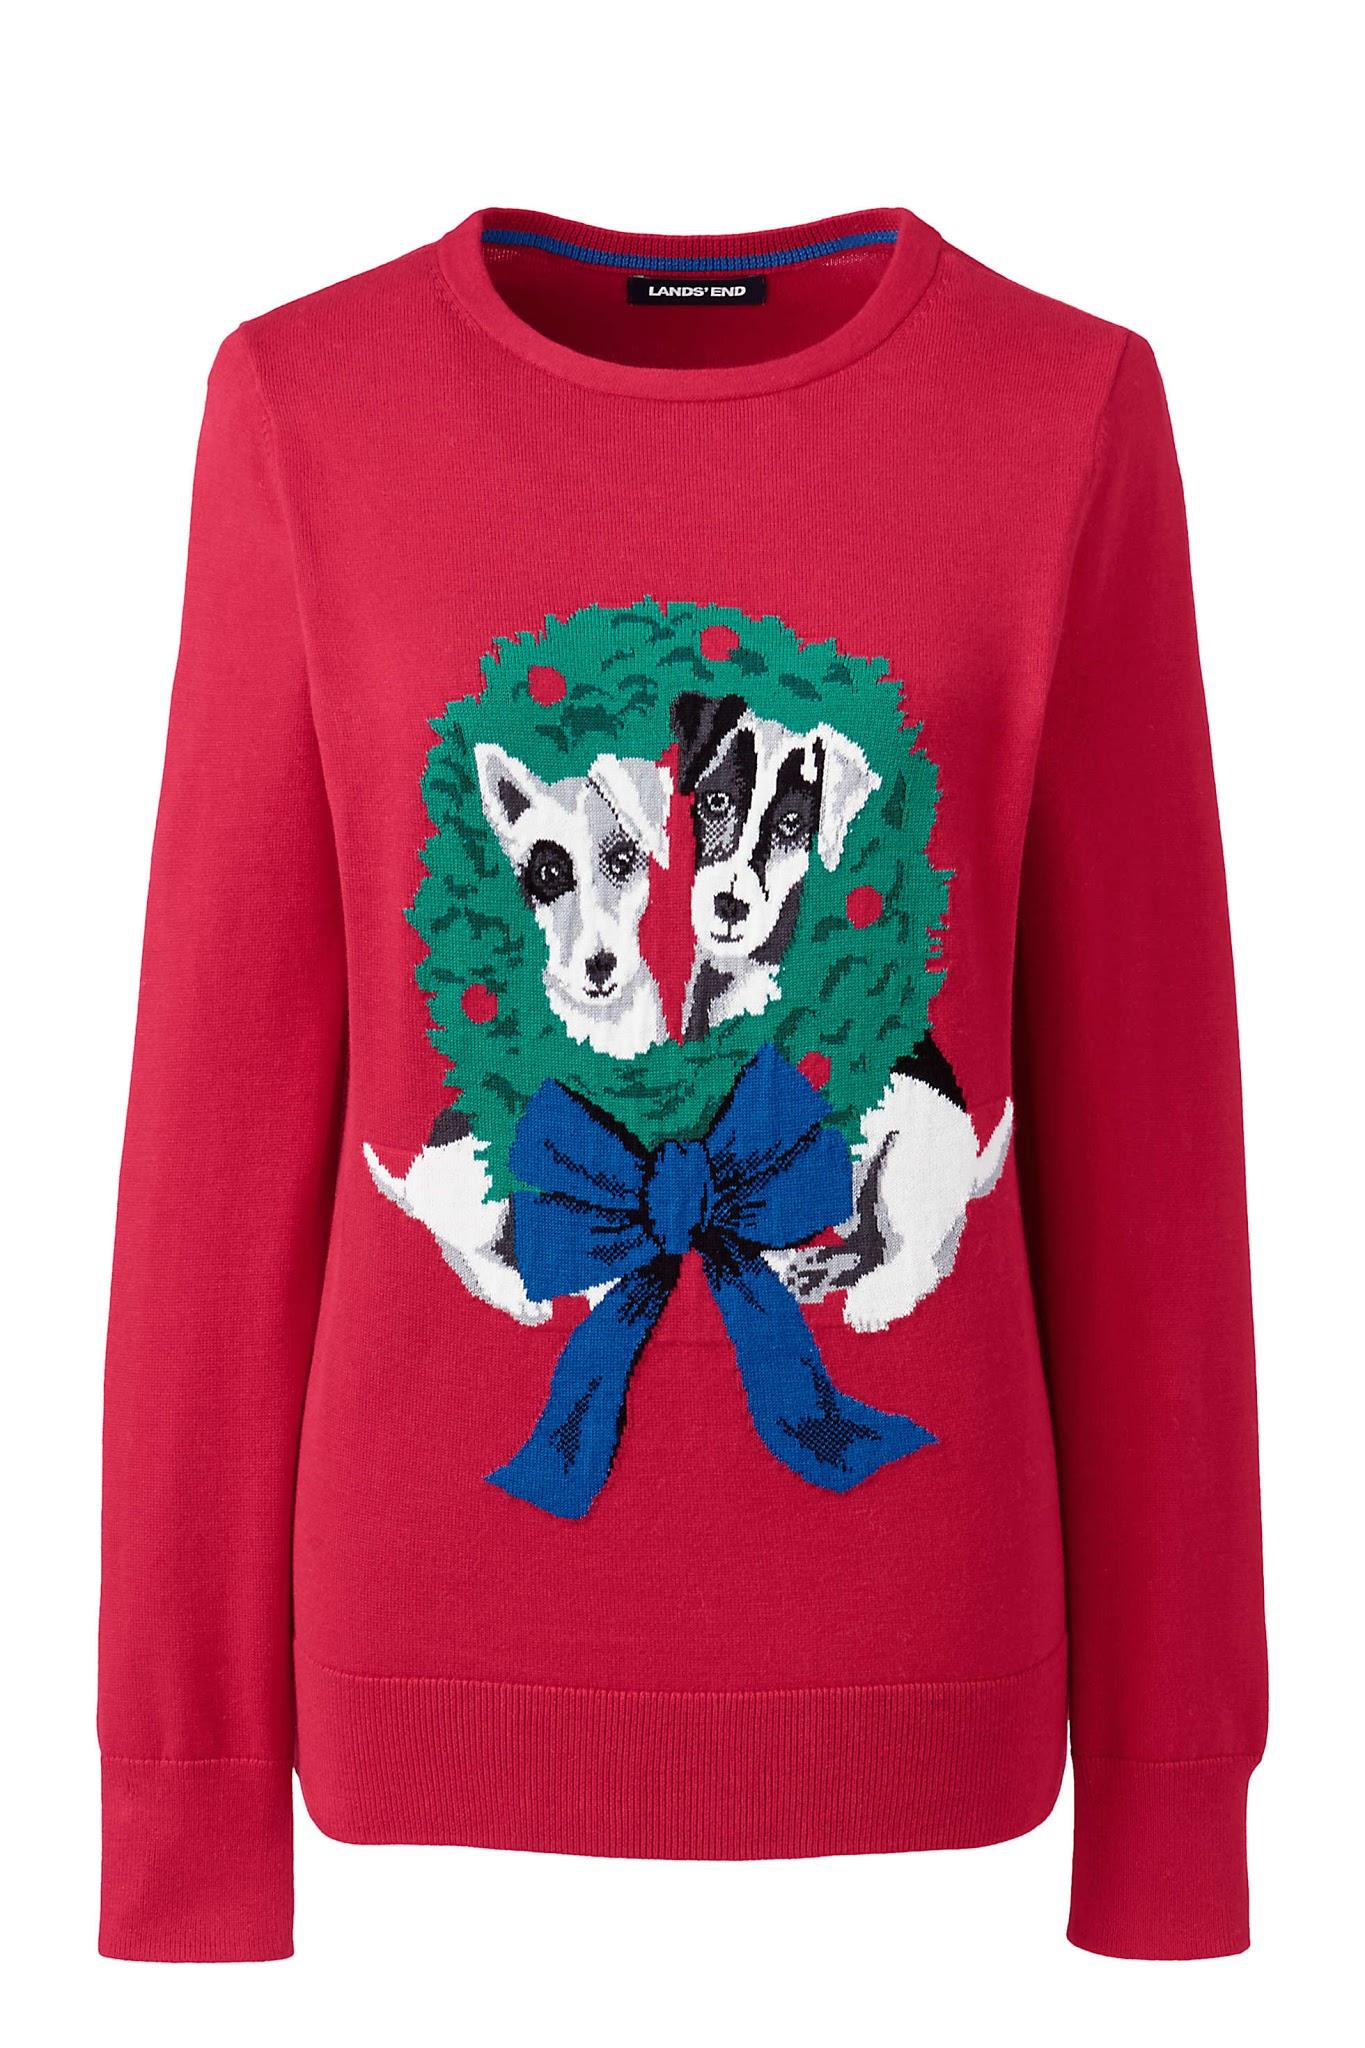 12 Awesome Christmas Sweaters! 134